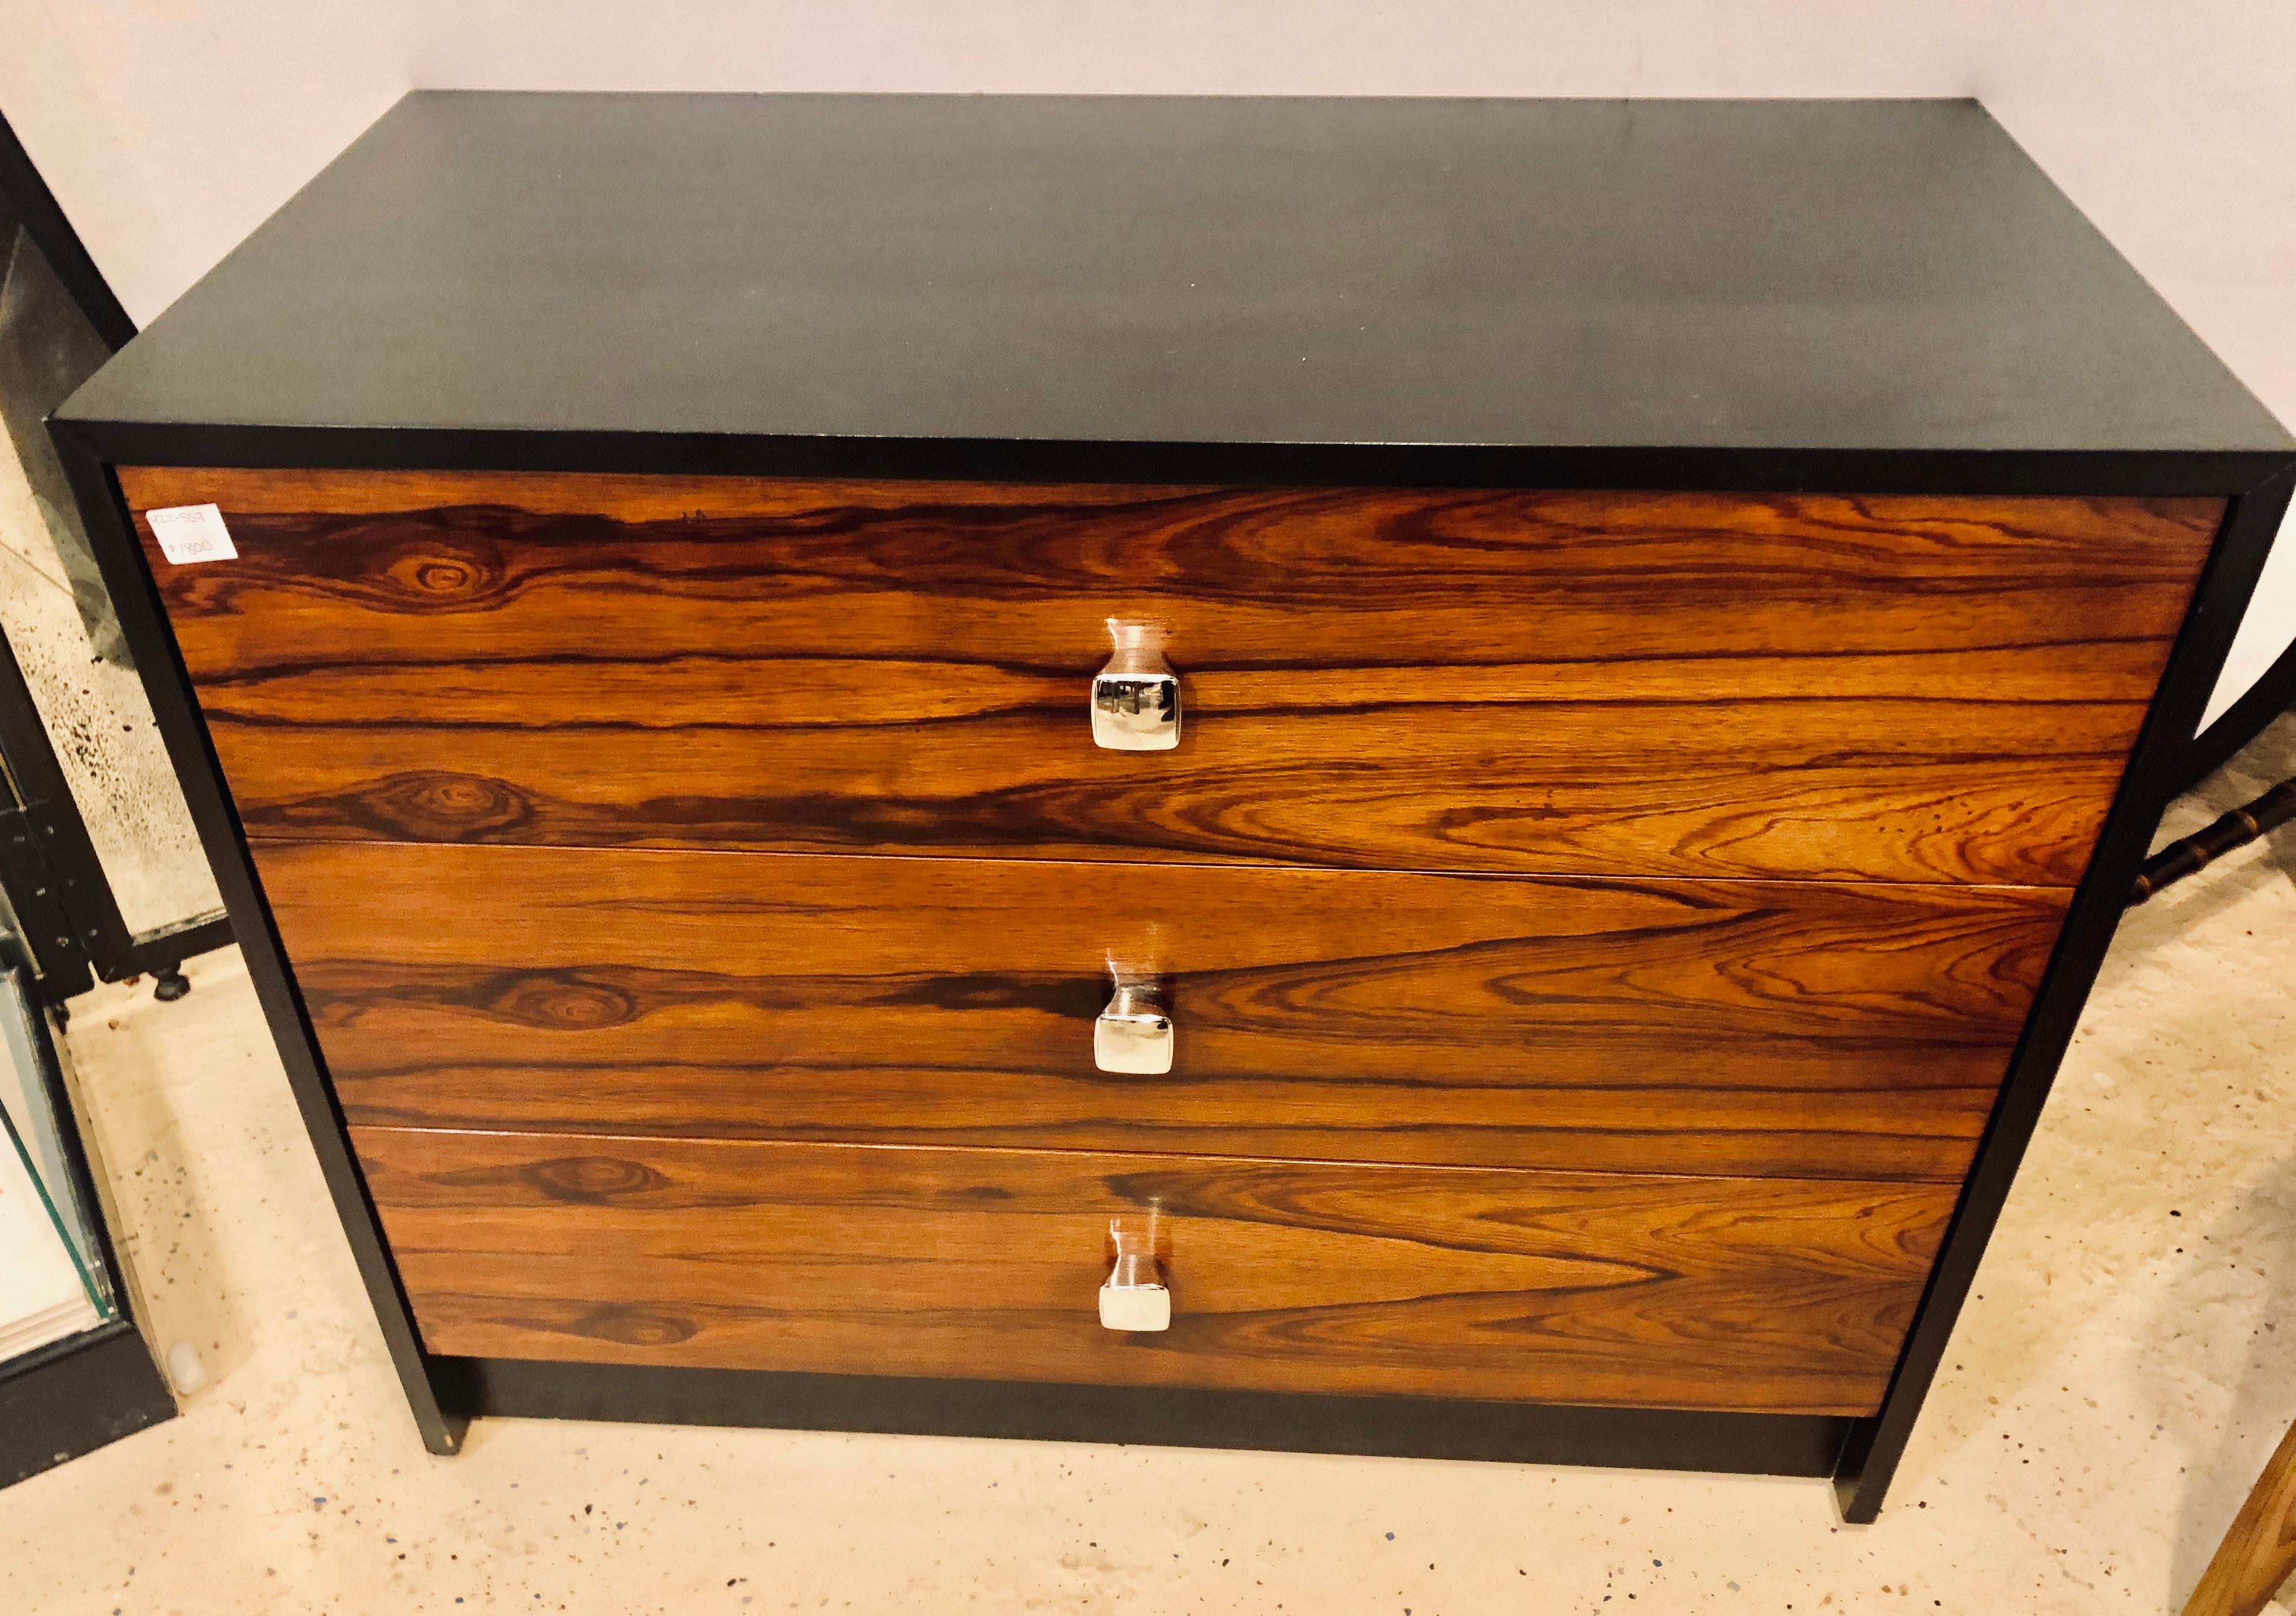 A Mid-Century Modern rosewood and ebony commode / chest or nightstand in the manner of Milo Baughman. This finely polished and decorative chest has an ebony case and rosewood front with chrome drawer pulls. Three large easy opening drawers make this